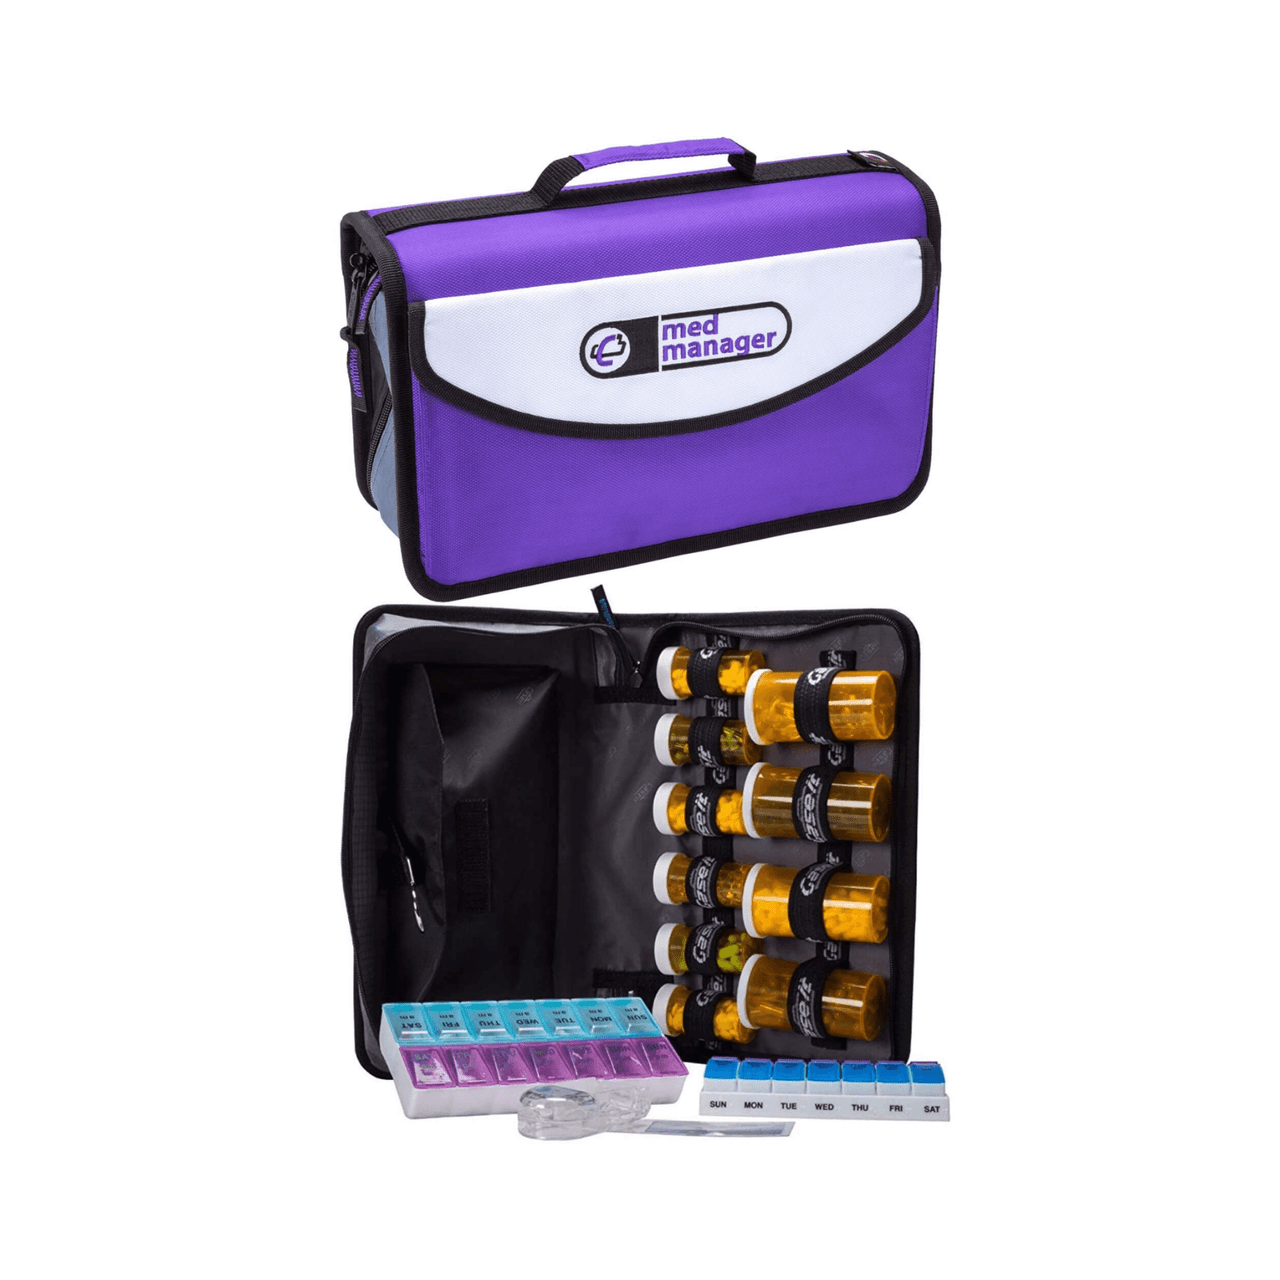 https://cdn11.bigcommerce.com/s-6dpzi5pd3/images/stencil/1280w/products/113/442/Mini_Medicine_Organizer_and_Pill_Case_1__34813.1694722509.png